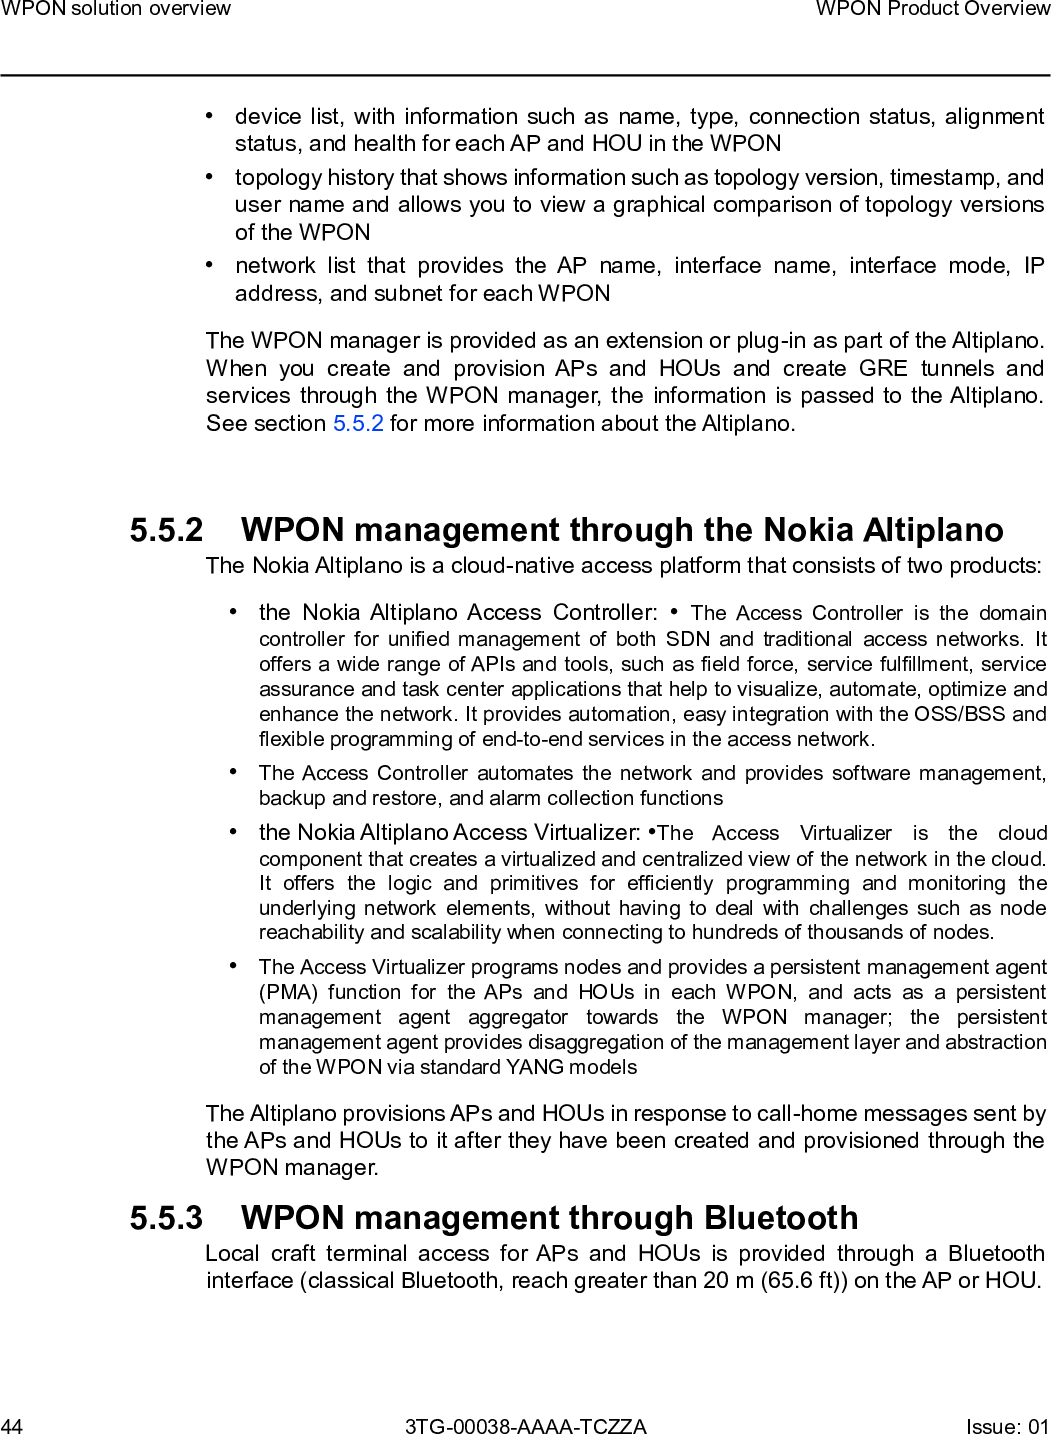 Page 44 of Nokia Bell 7577WPONAPDC WPON User Manual WPON Product Overview